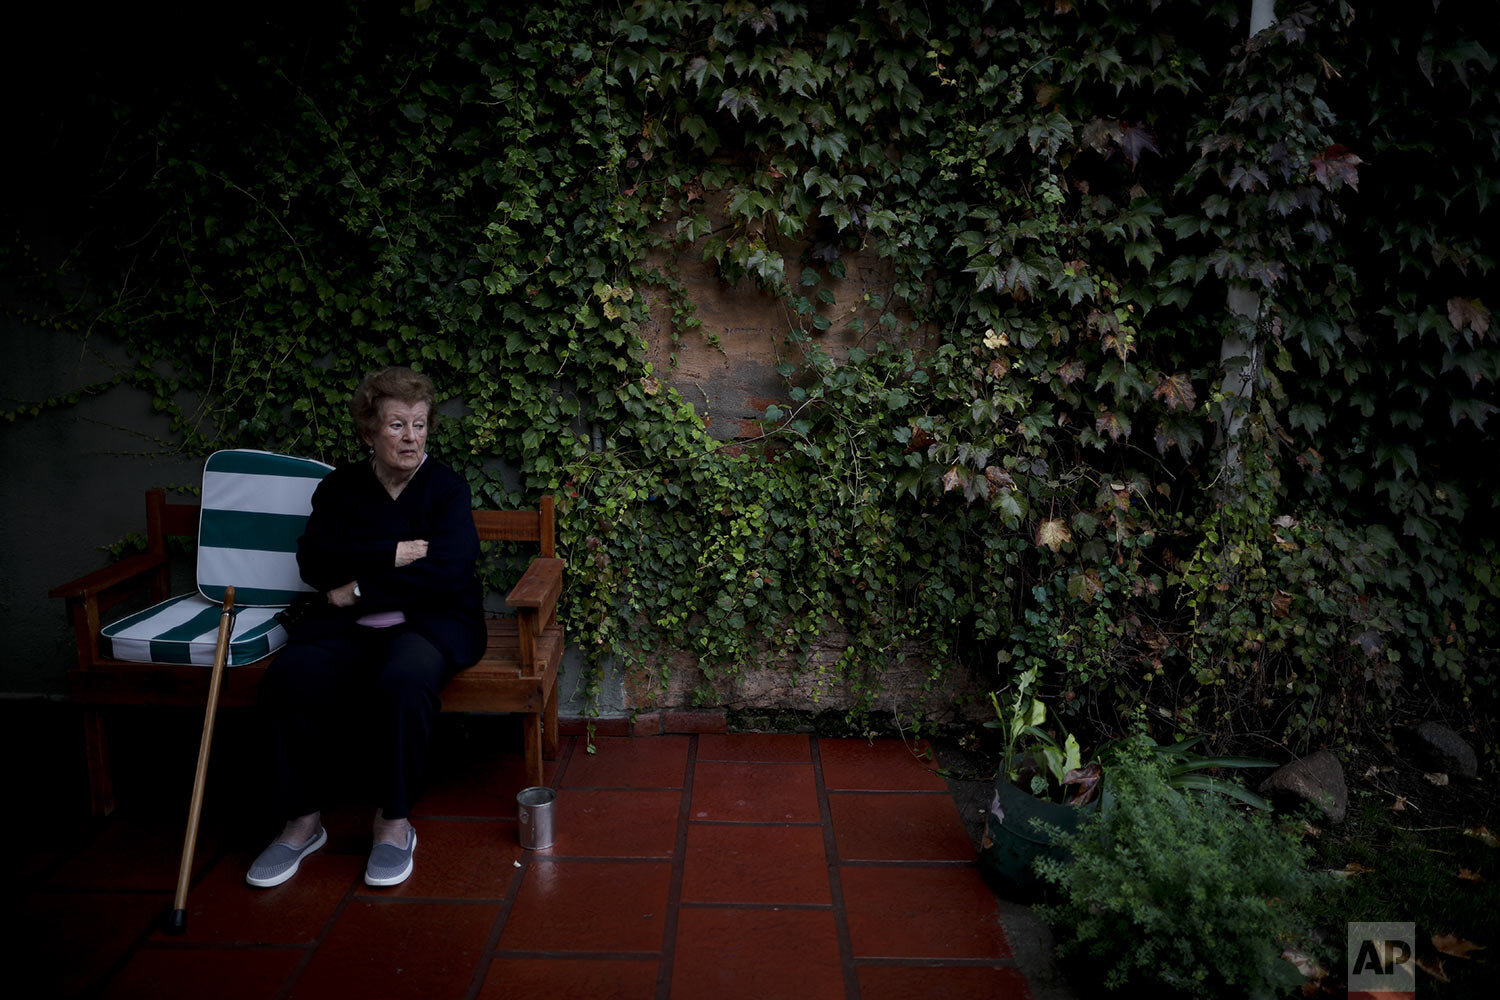  Thelma Amezua sits in the garden at the Reminiscencias residence for the elderly in Tandil, Argentina, Monday, April 5, 2021. (AP Photo/Natacha Pisarenko) 